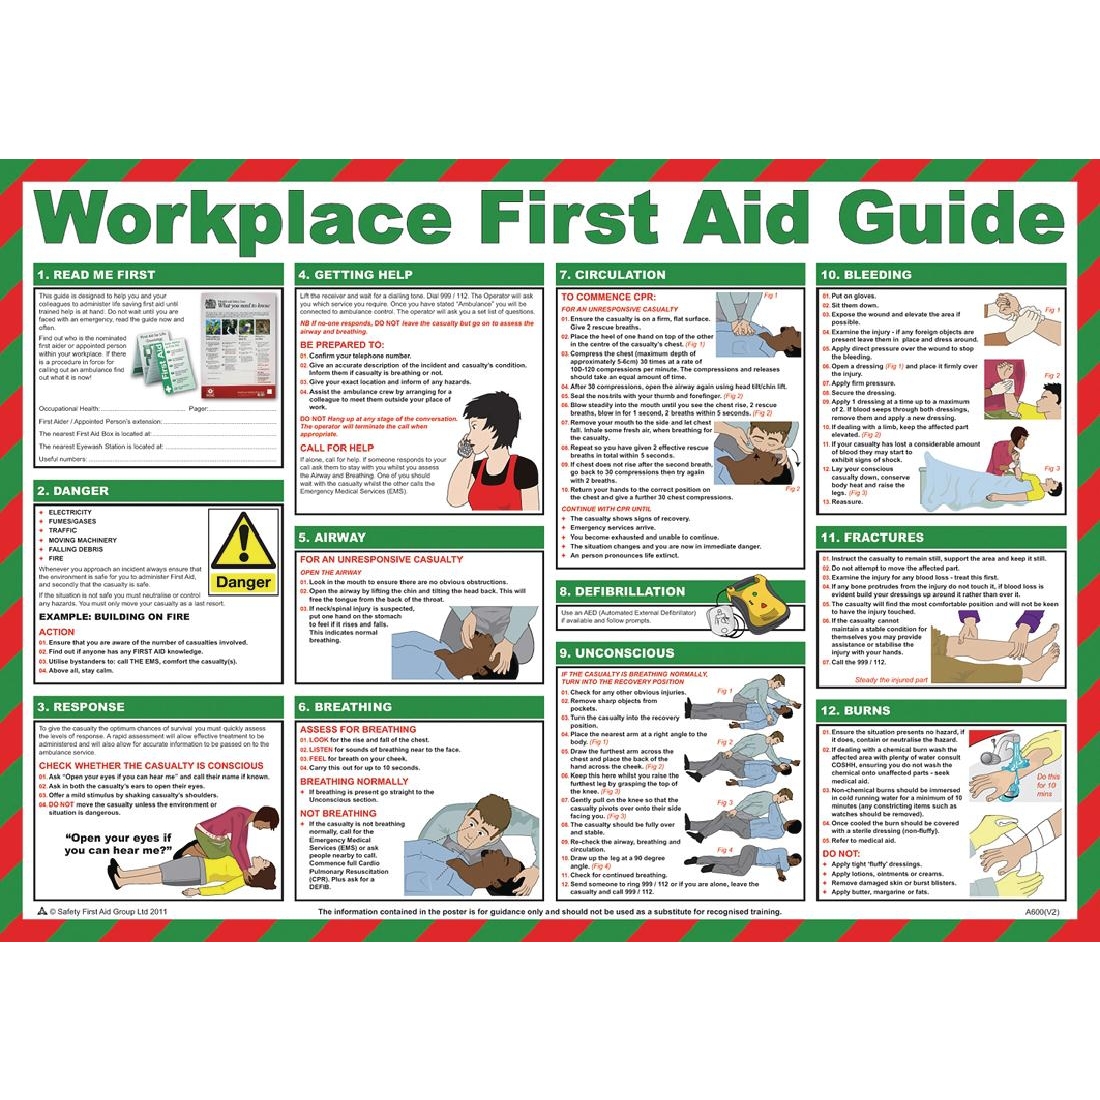 First Aid Guide For Workplace Poster